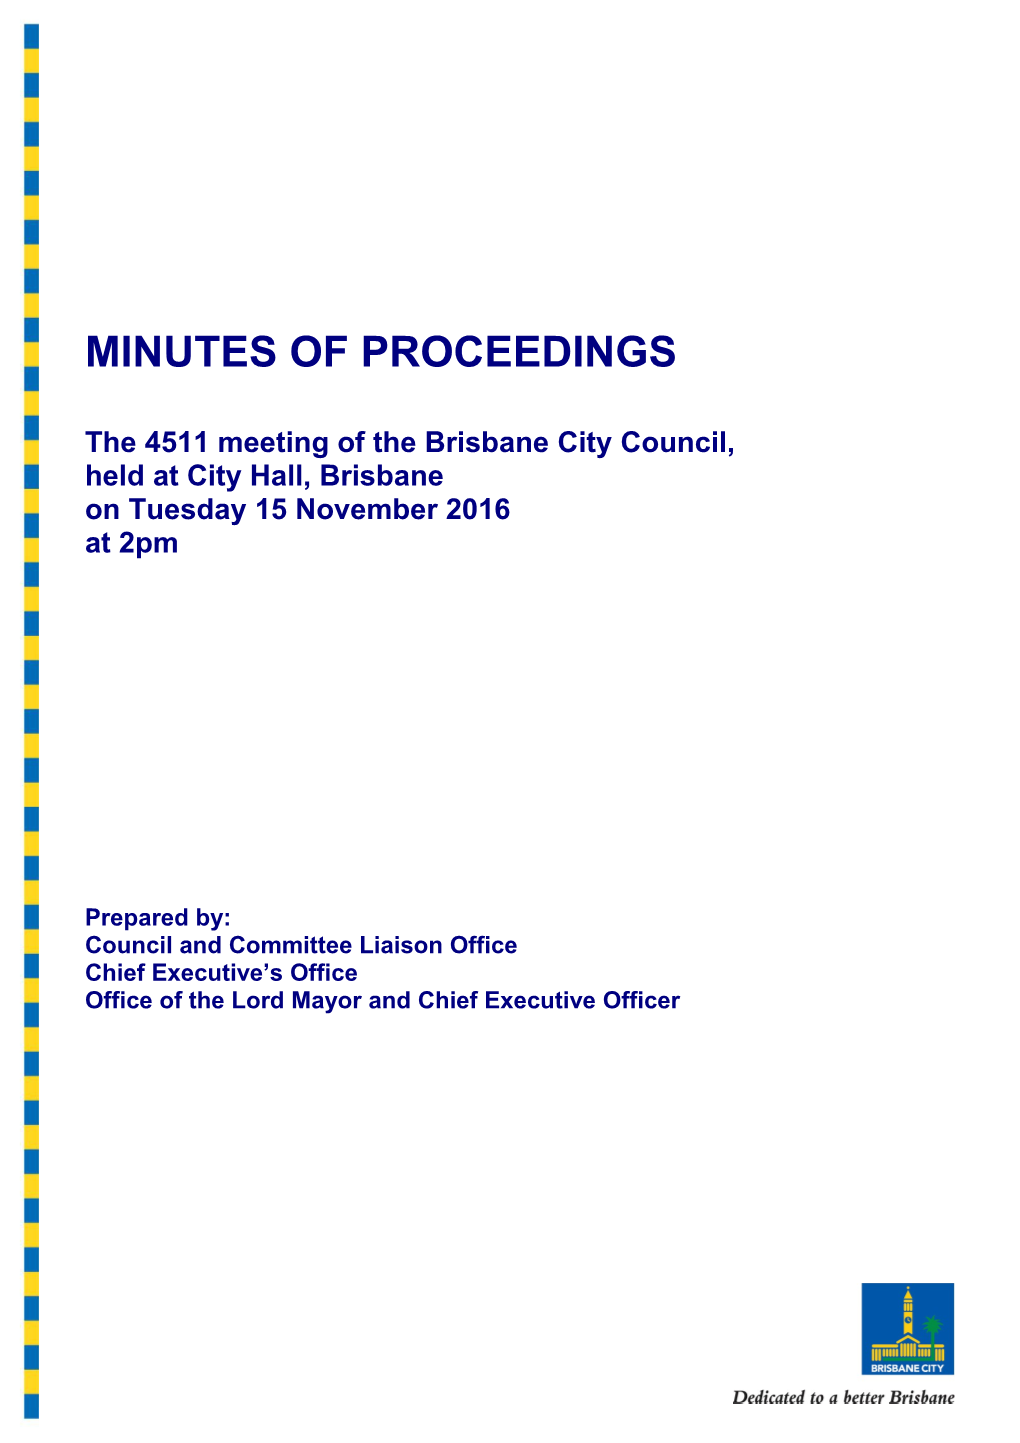 The 4511 Meeting of the Brisbane City Council